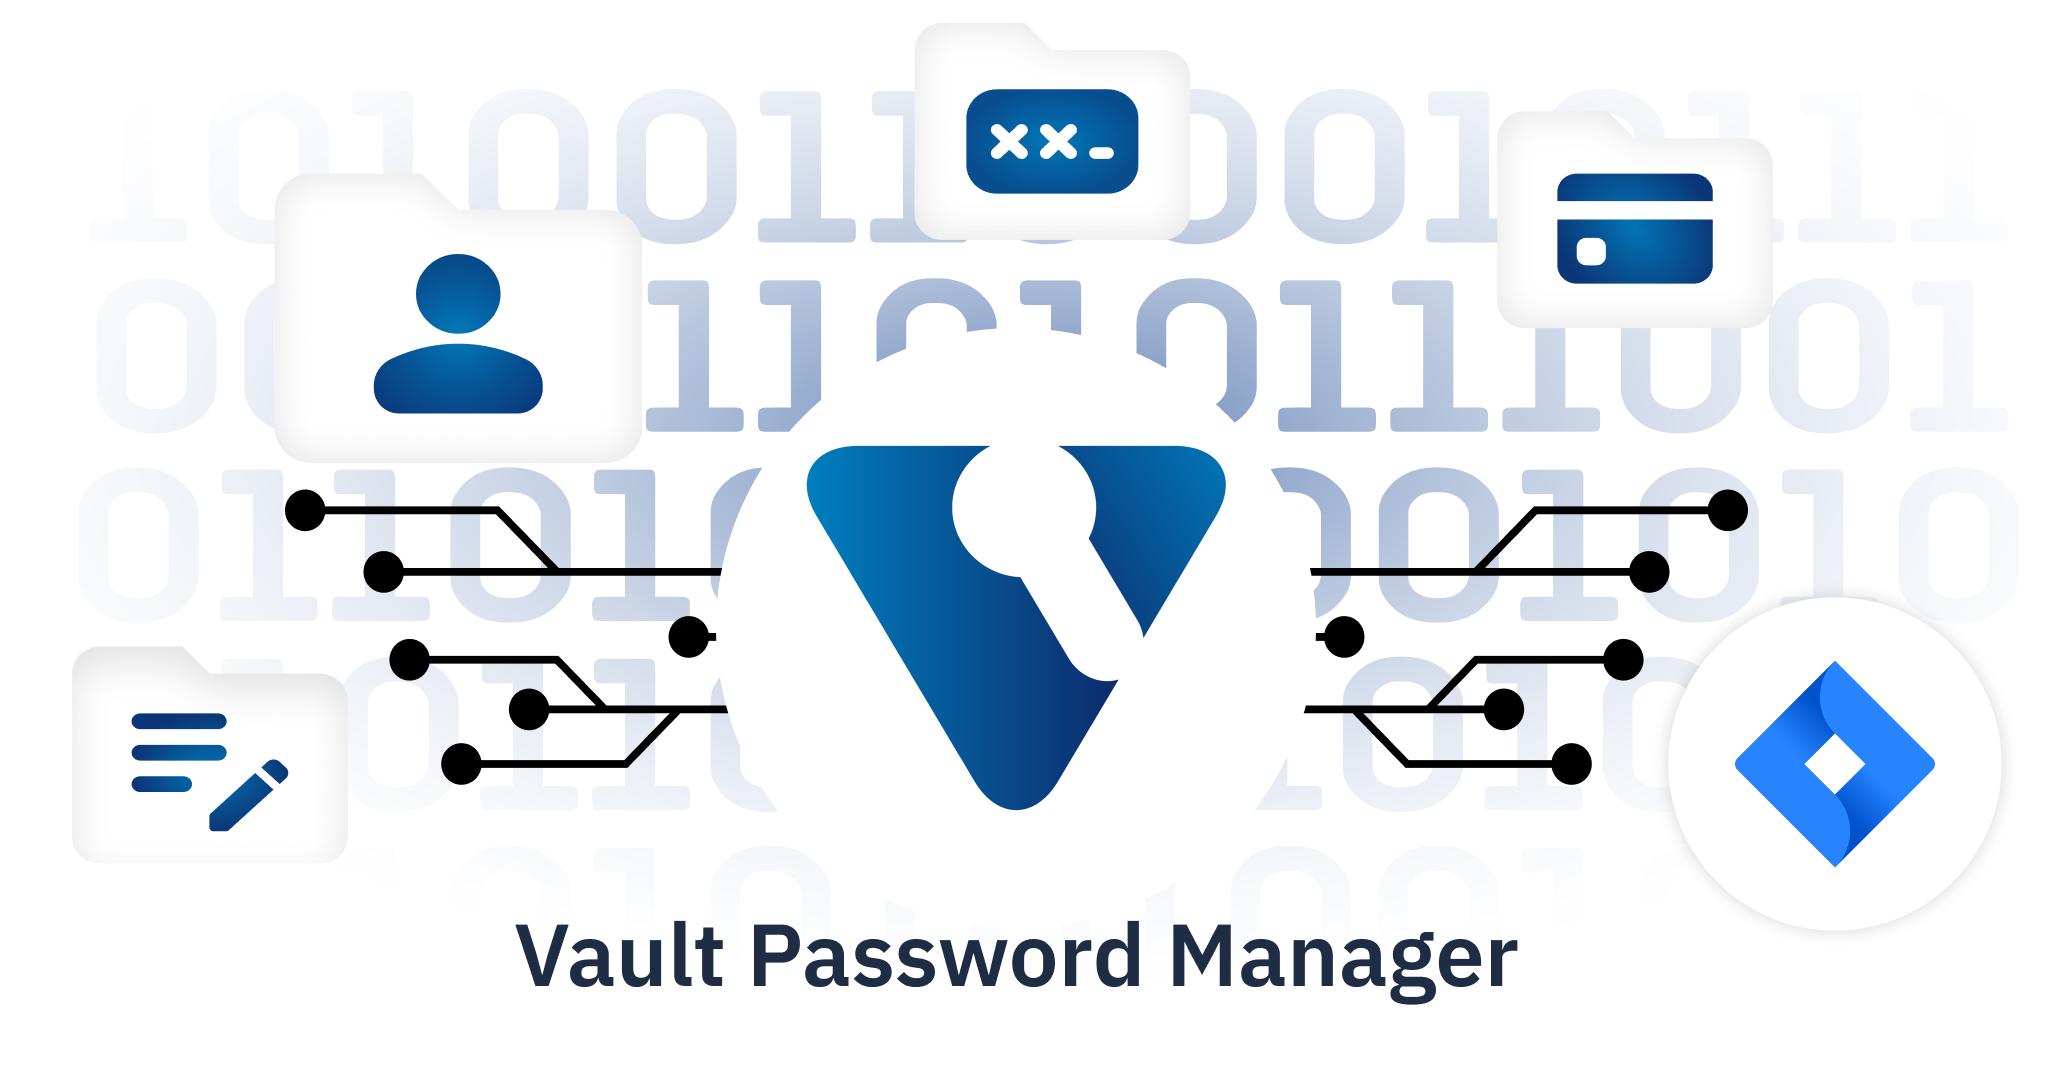 Alpha Serve Introduces Vault Password Manager App for Jira on the Atlassian Marketplace